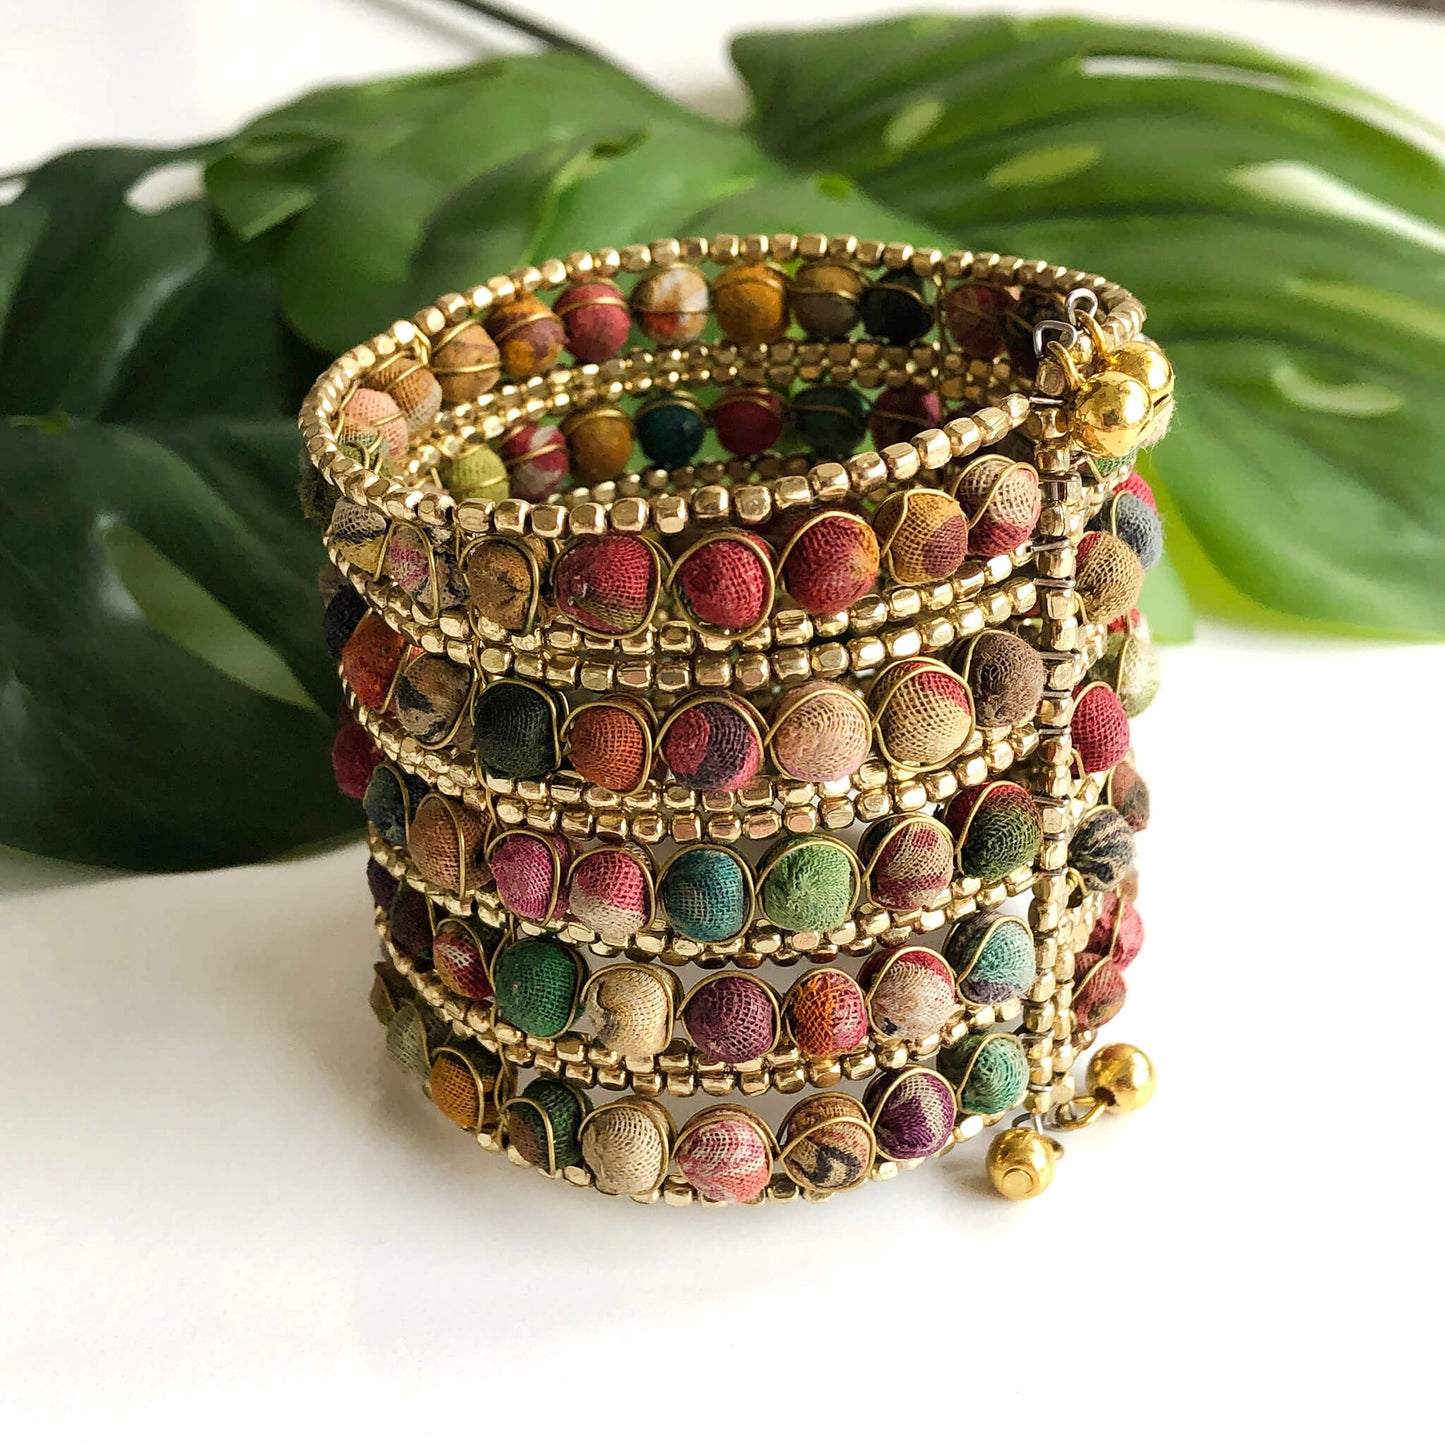 A large cuff bracelet made from many small textile-covered beads and tiny gold beads.